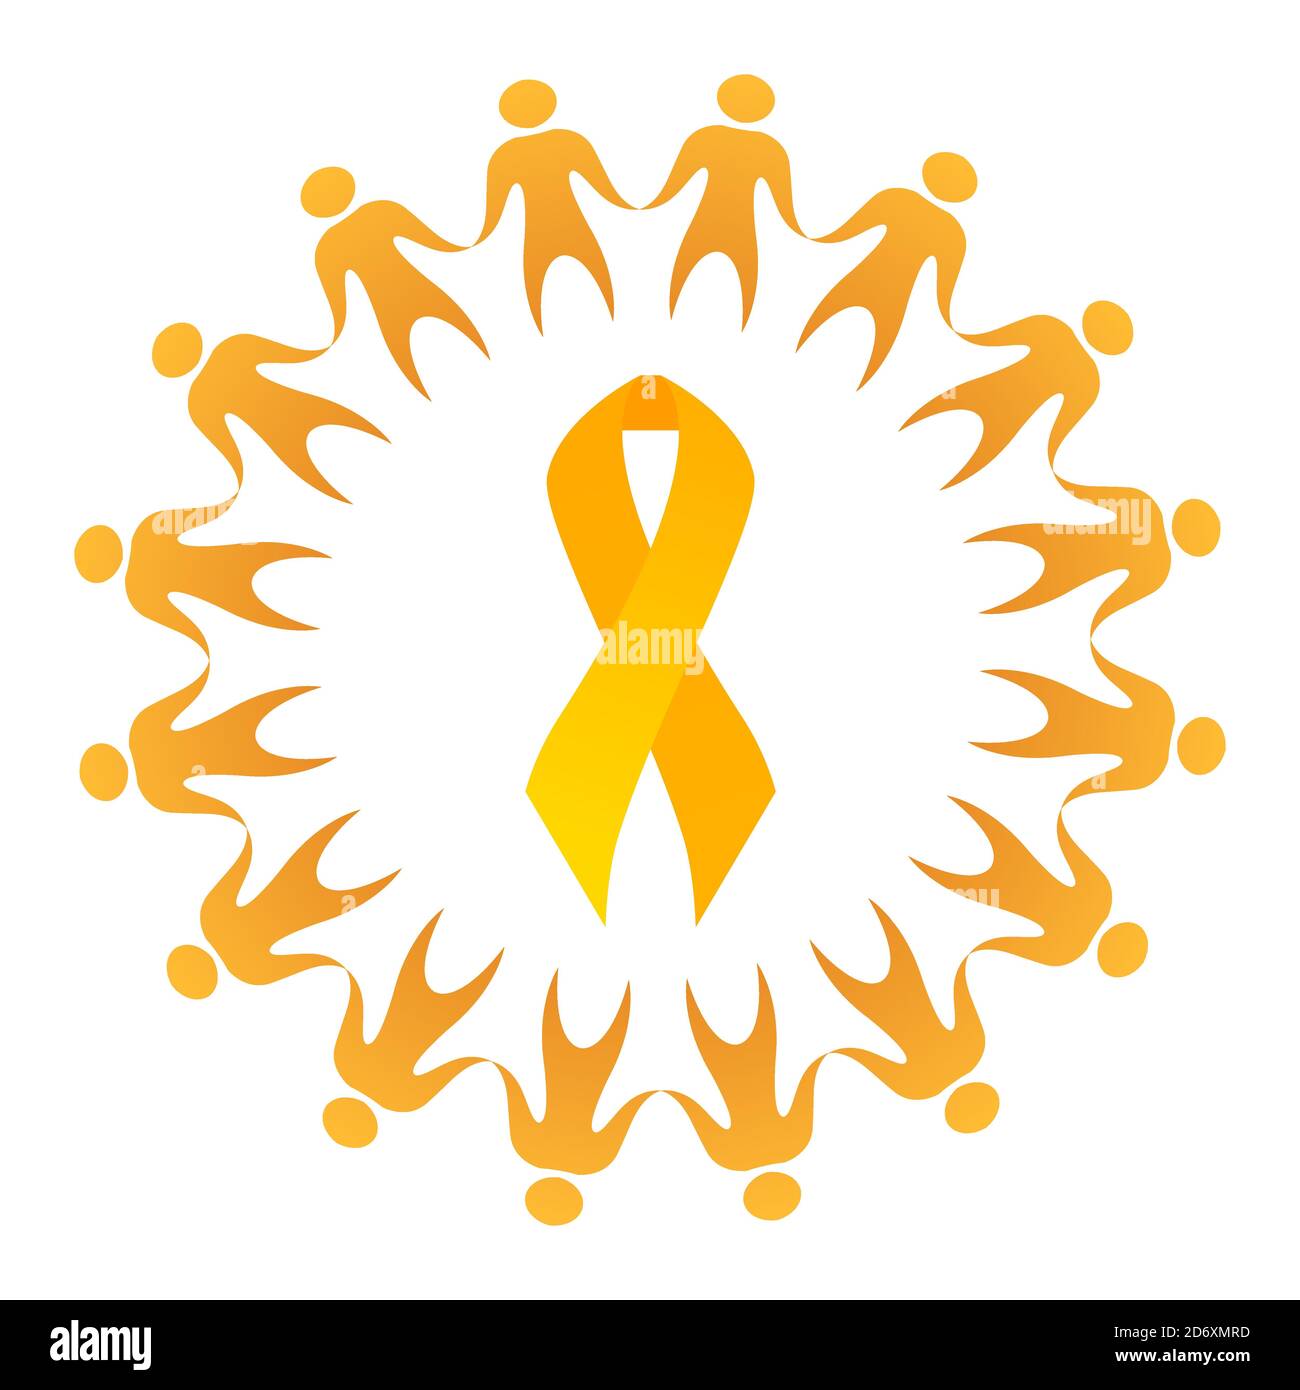 Childhood cancer. Yellow happy dance people in circle and gold ribbon. Children cancer awareness. Symbol of hope and unity. Vector element for card, b Stock Vector